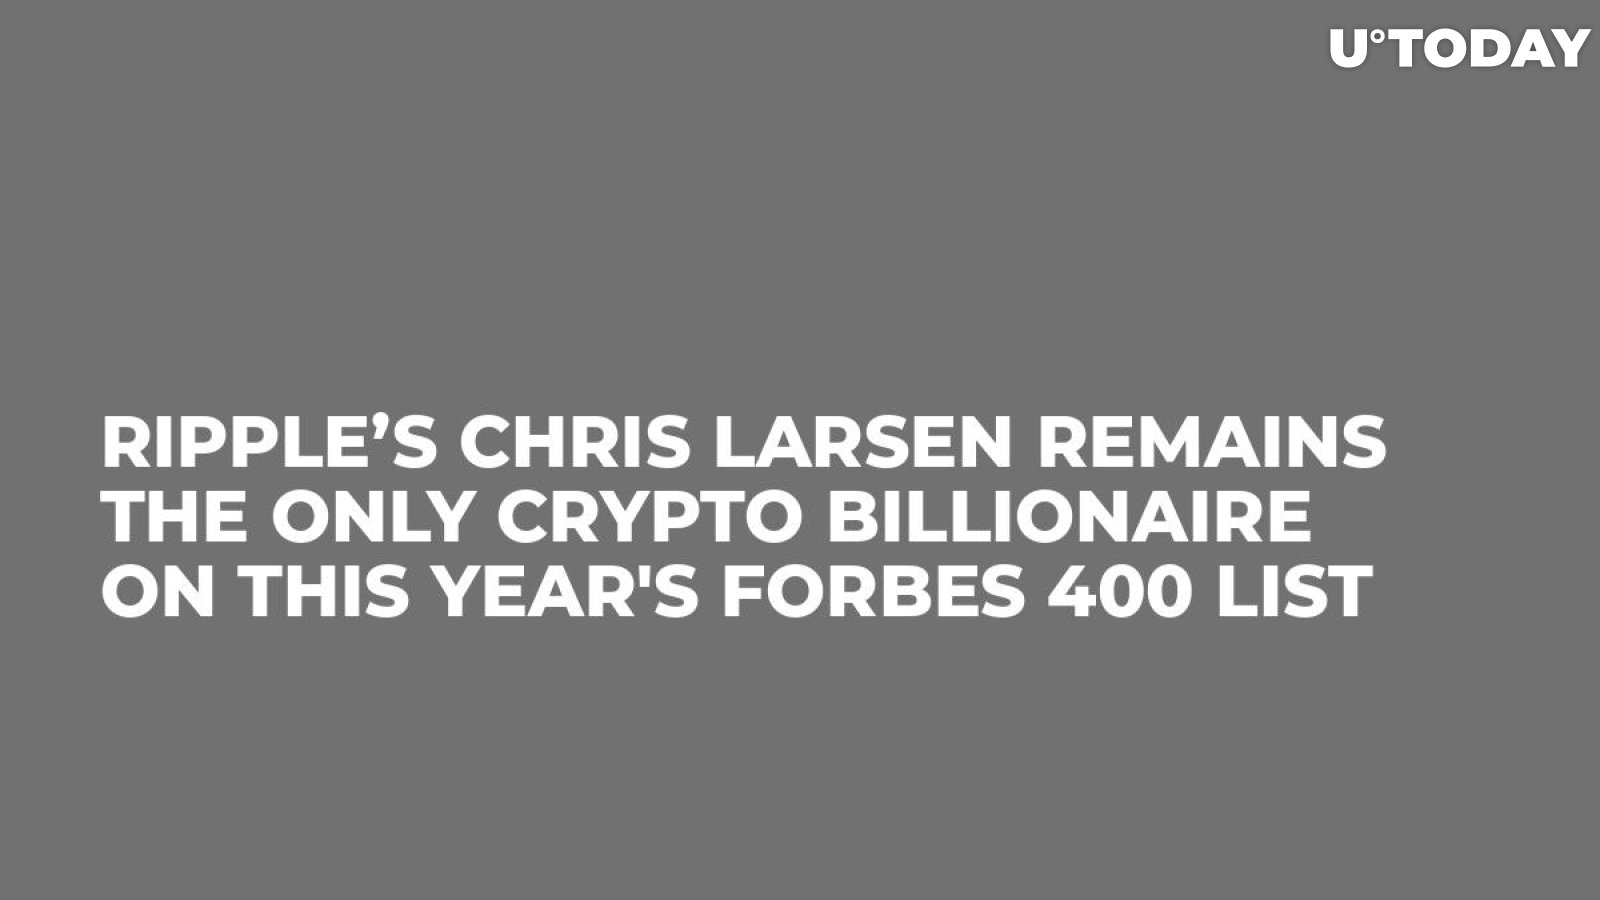 Ripple’s Chris Larsen Remains the Only Crypto Billionaire on This Year's Forbes 400 List